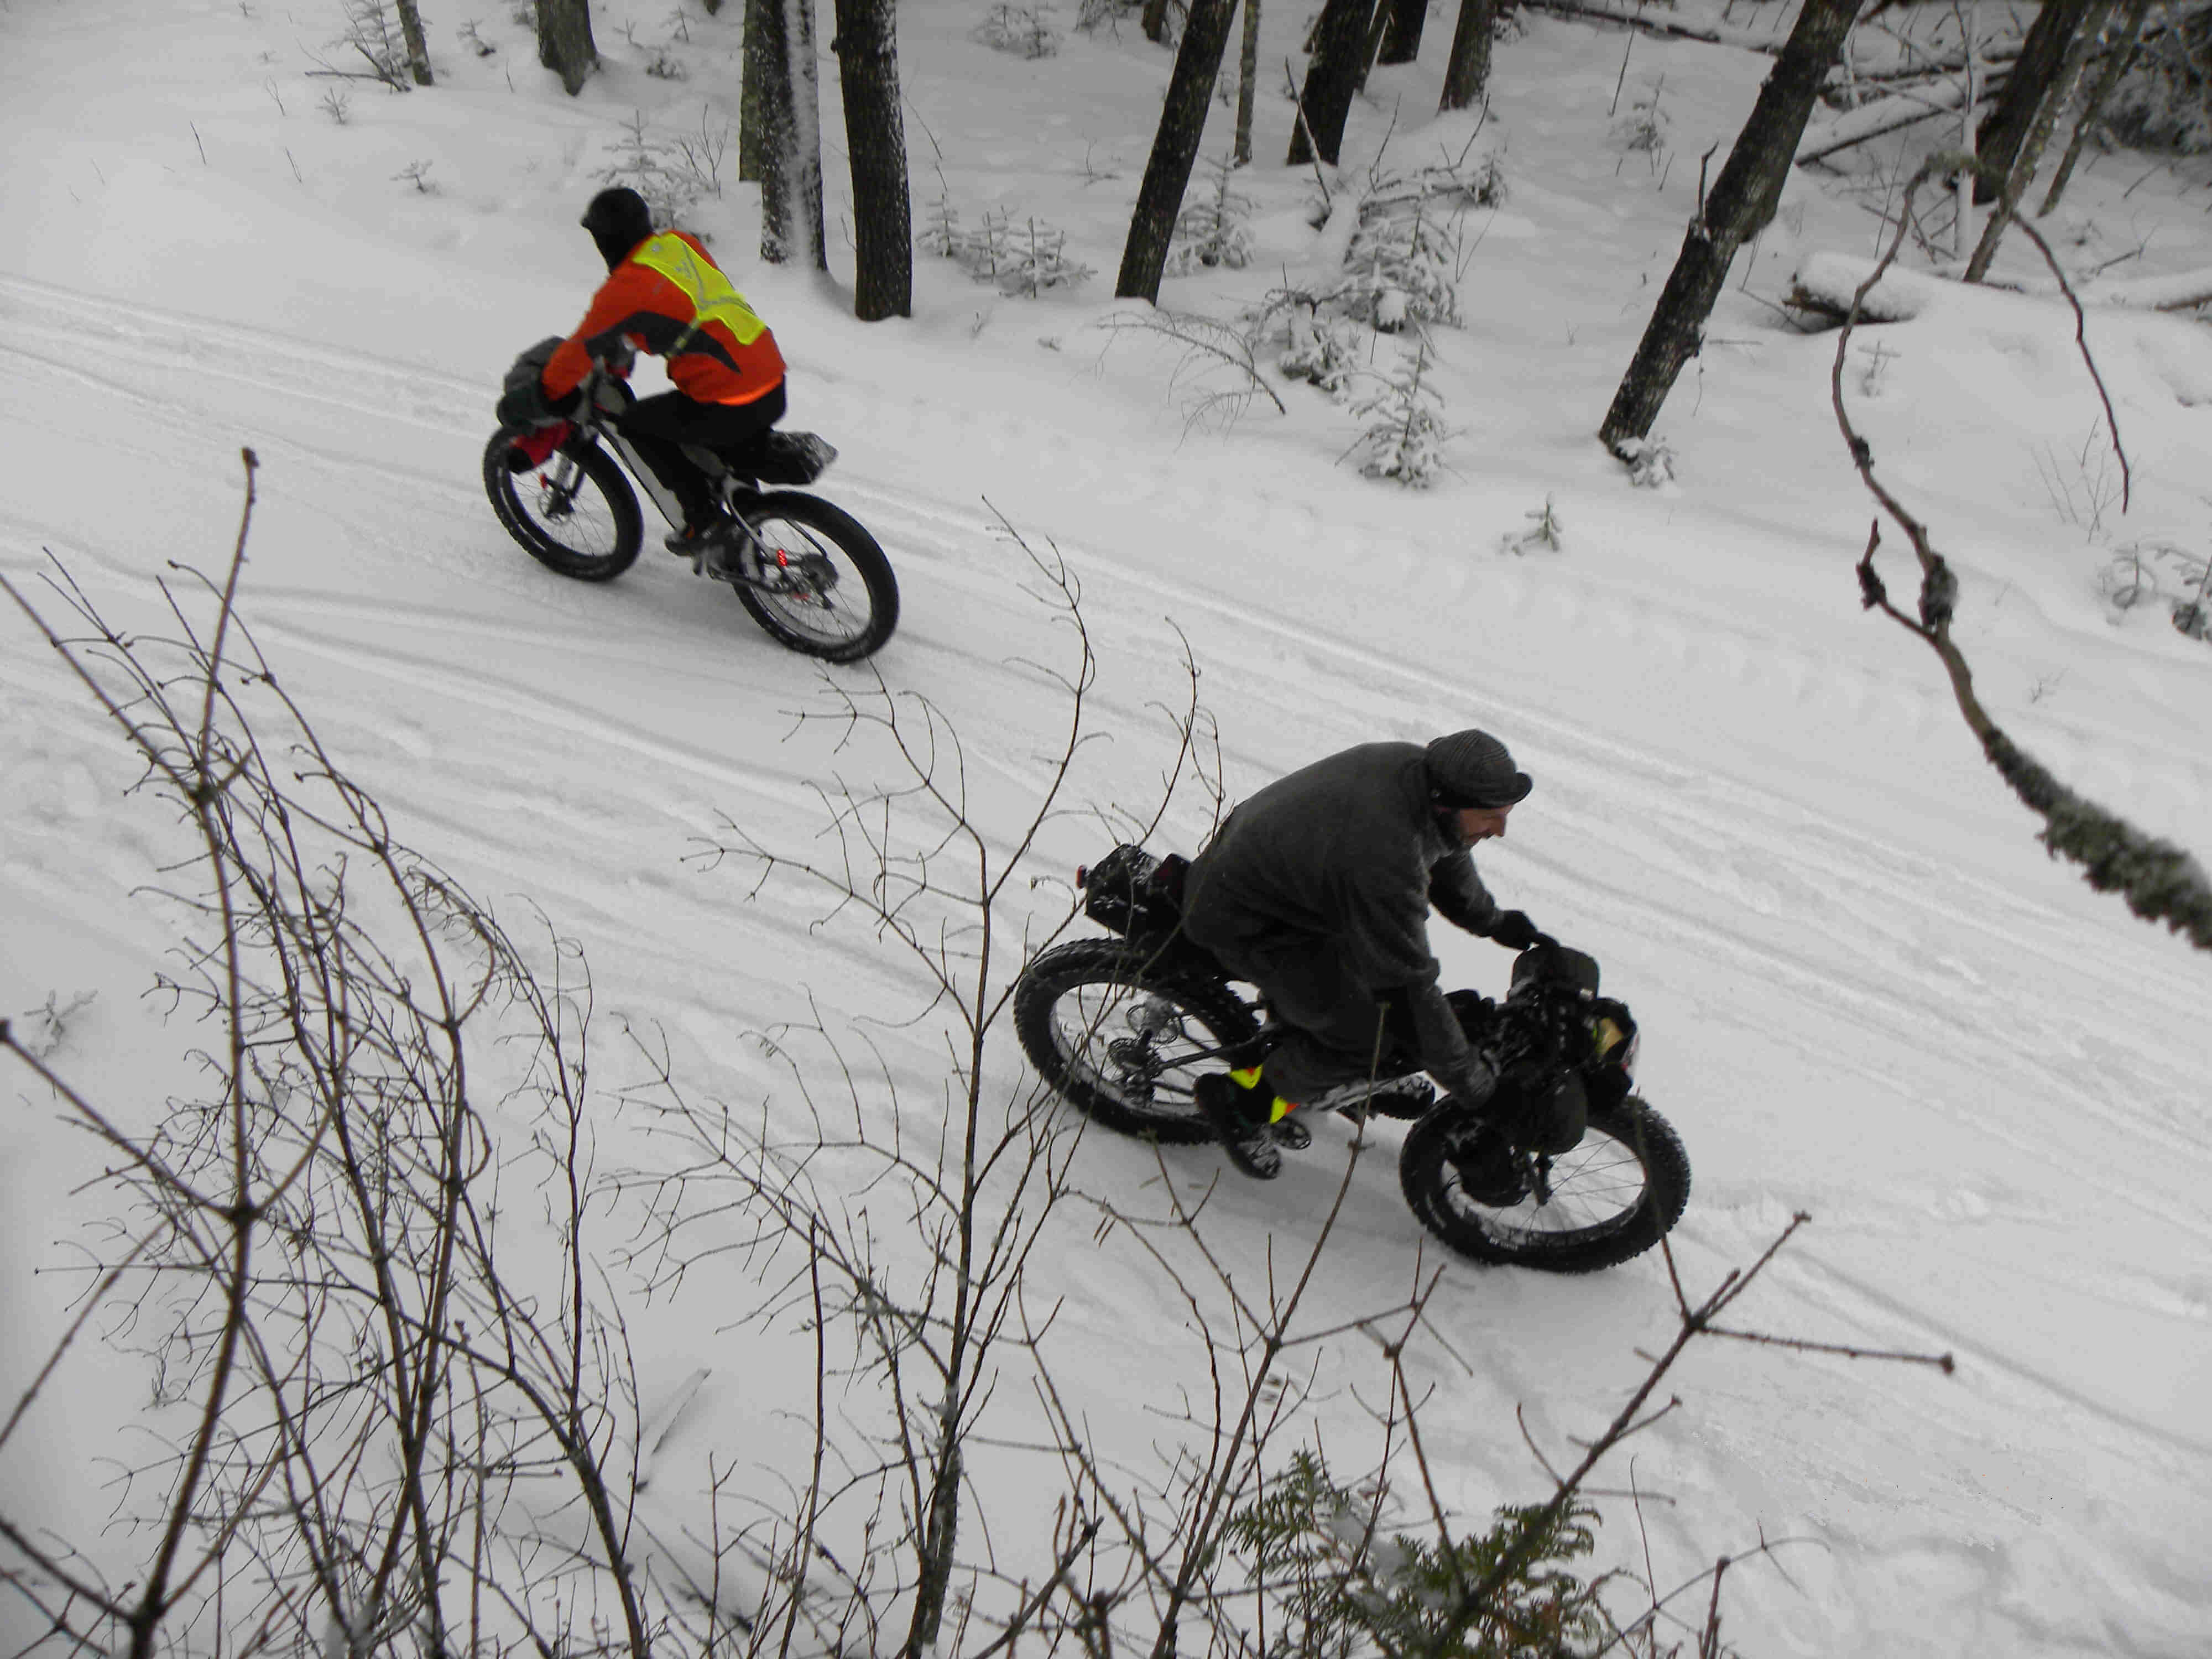 Downward view of 2 cyclists, wearing winter attire, riding their Surly fat bikes in opposite directions on a snowy trail